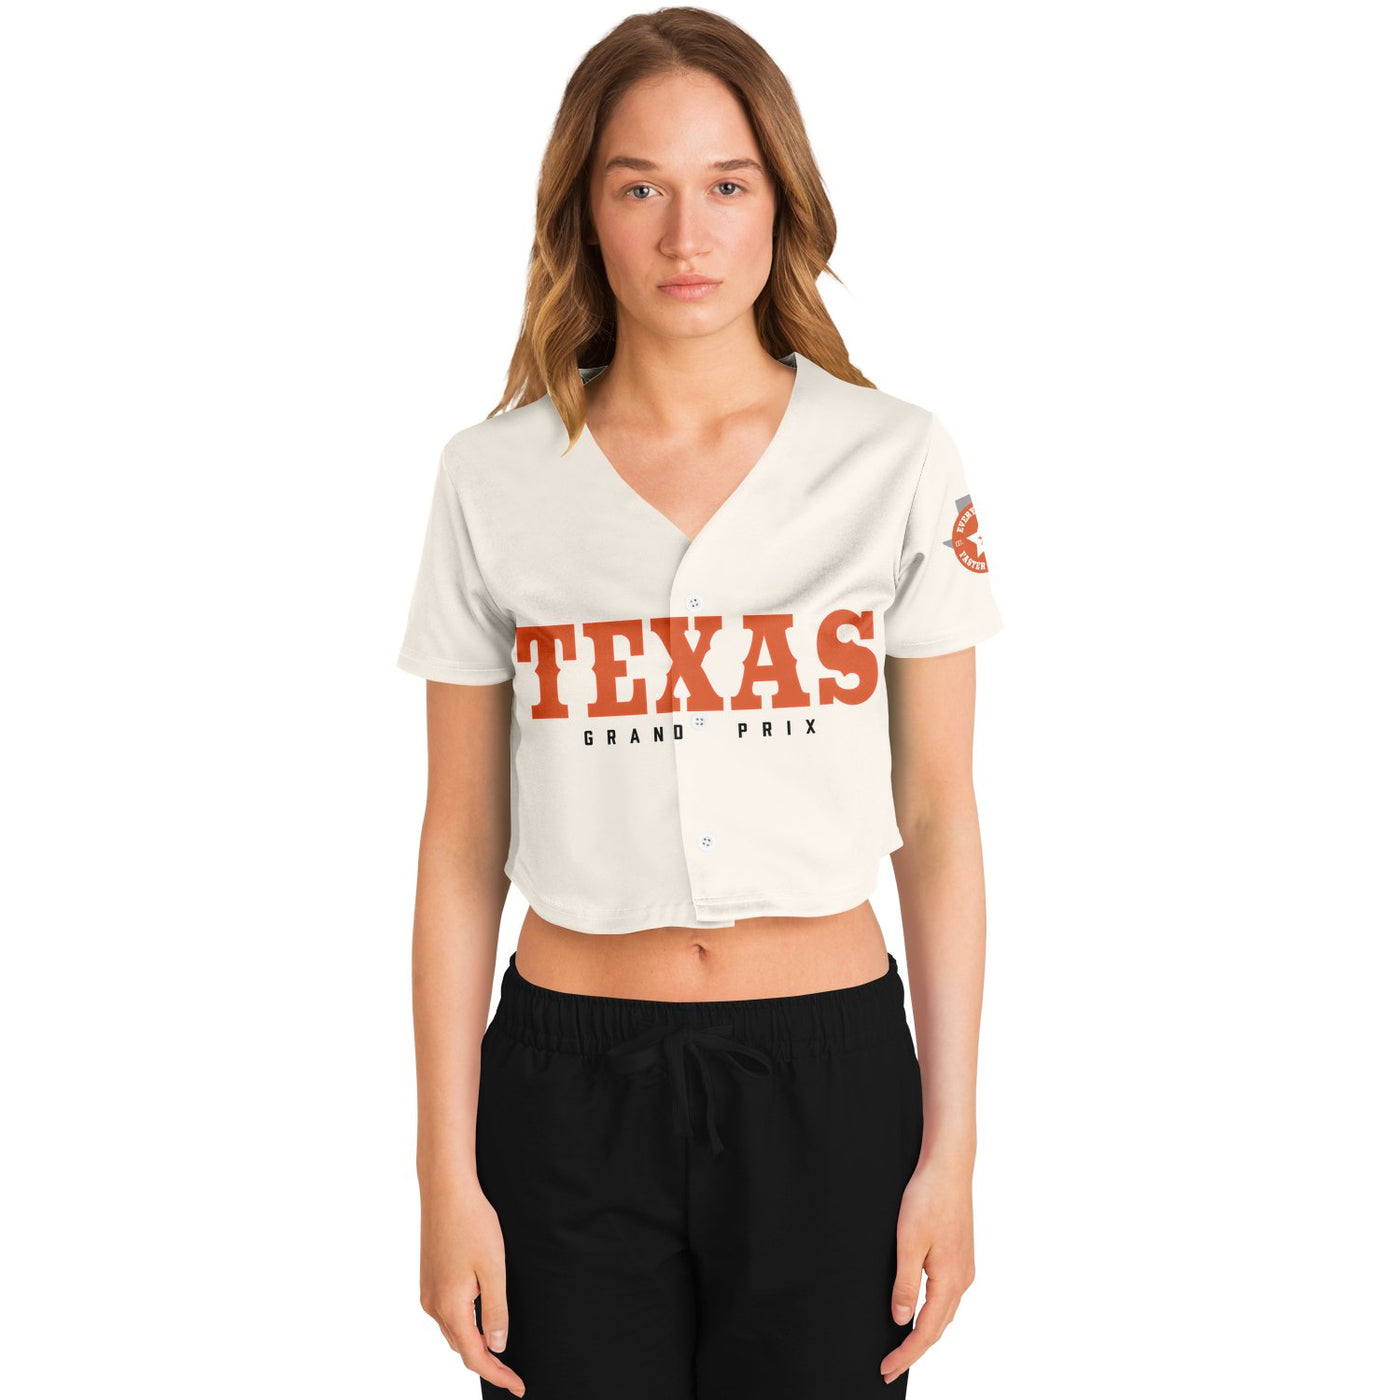 Alonso - Off-White Texas GP Crop Top - Furious Motorsport